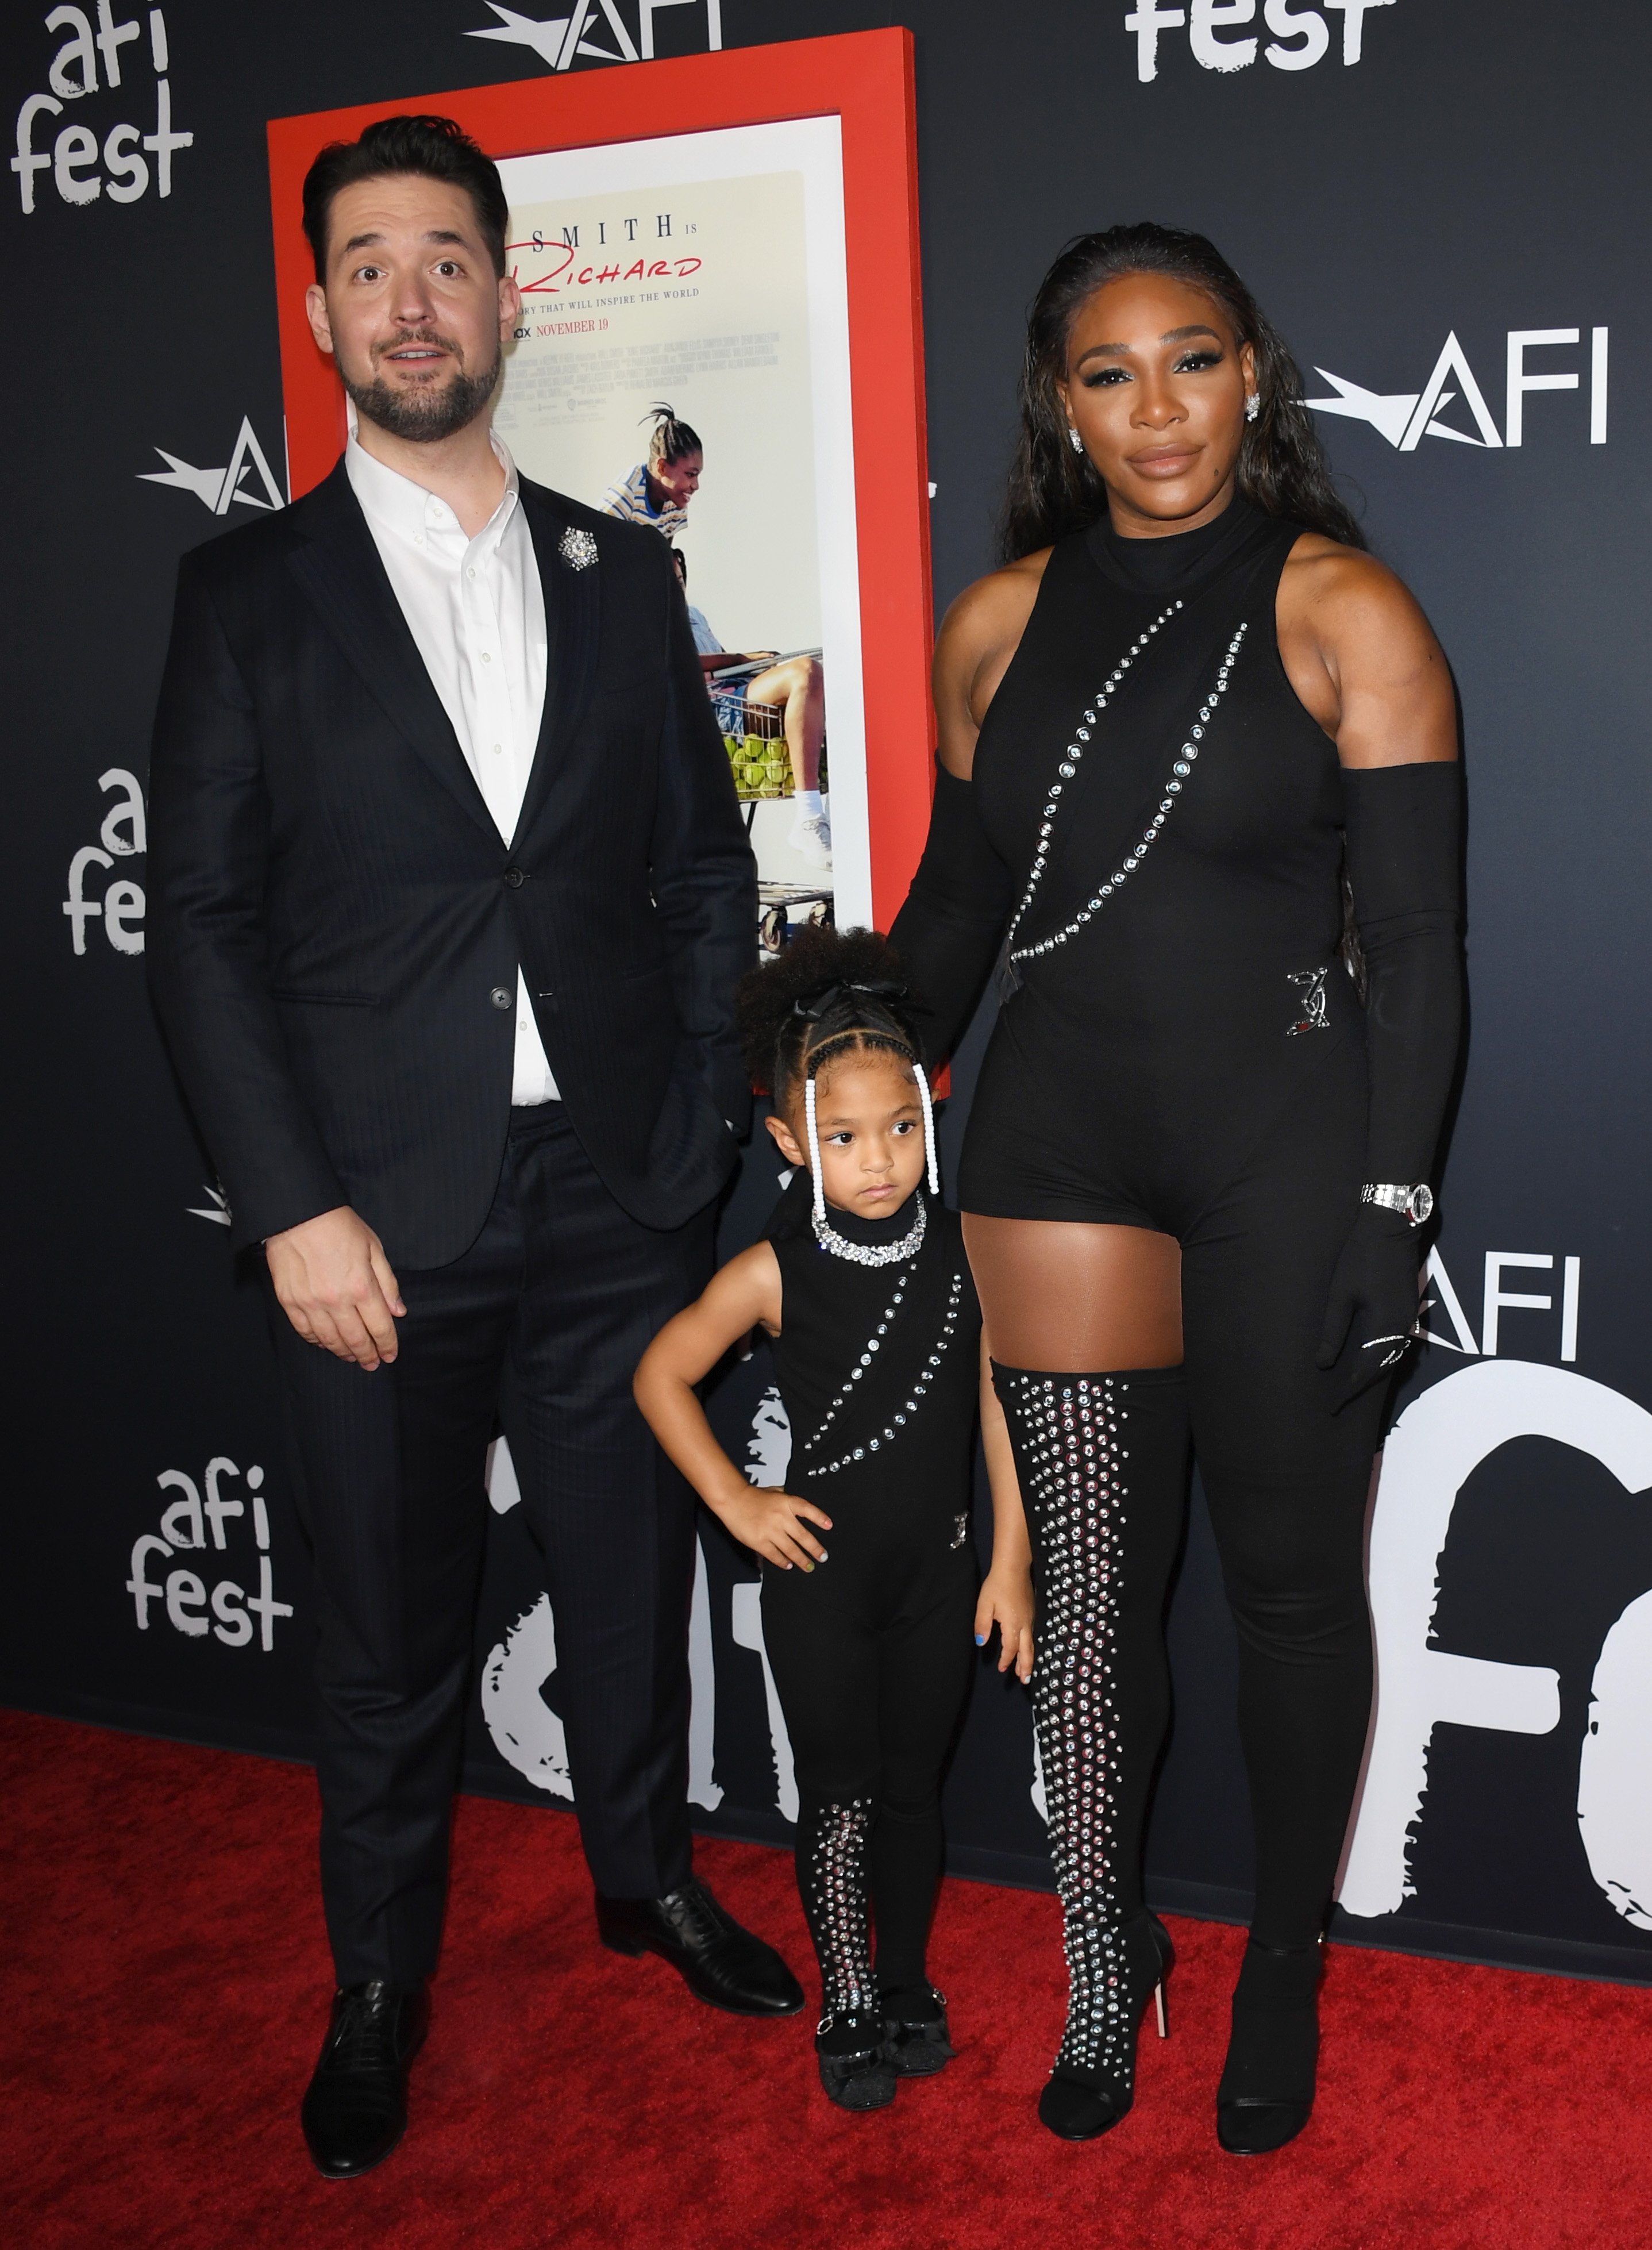 Alexis Ohanian, Olympia Ohanian Jr., and Serena Williams at the AFI Fest: Closing Night Premiere of Warner Bros. "King Richard" on November 14, 2021, in Hollywood, California. | Source: Getty Images